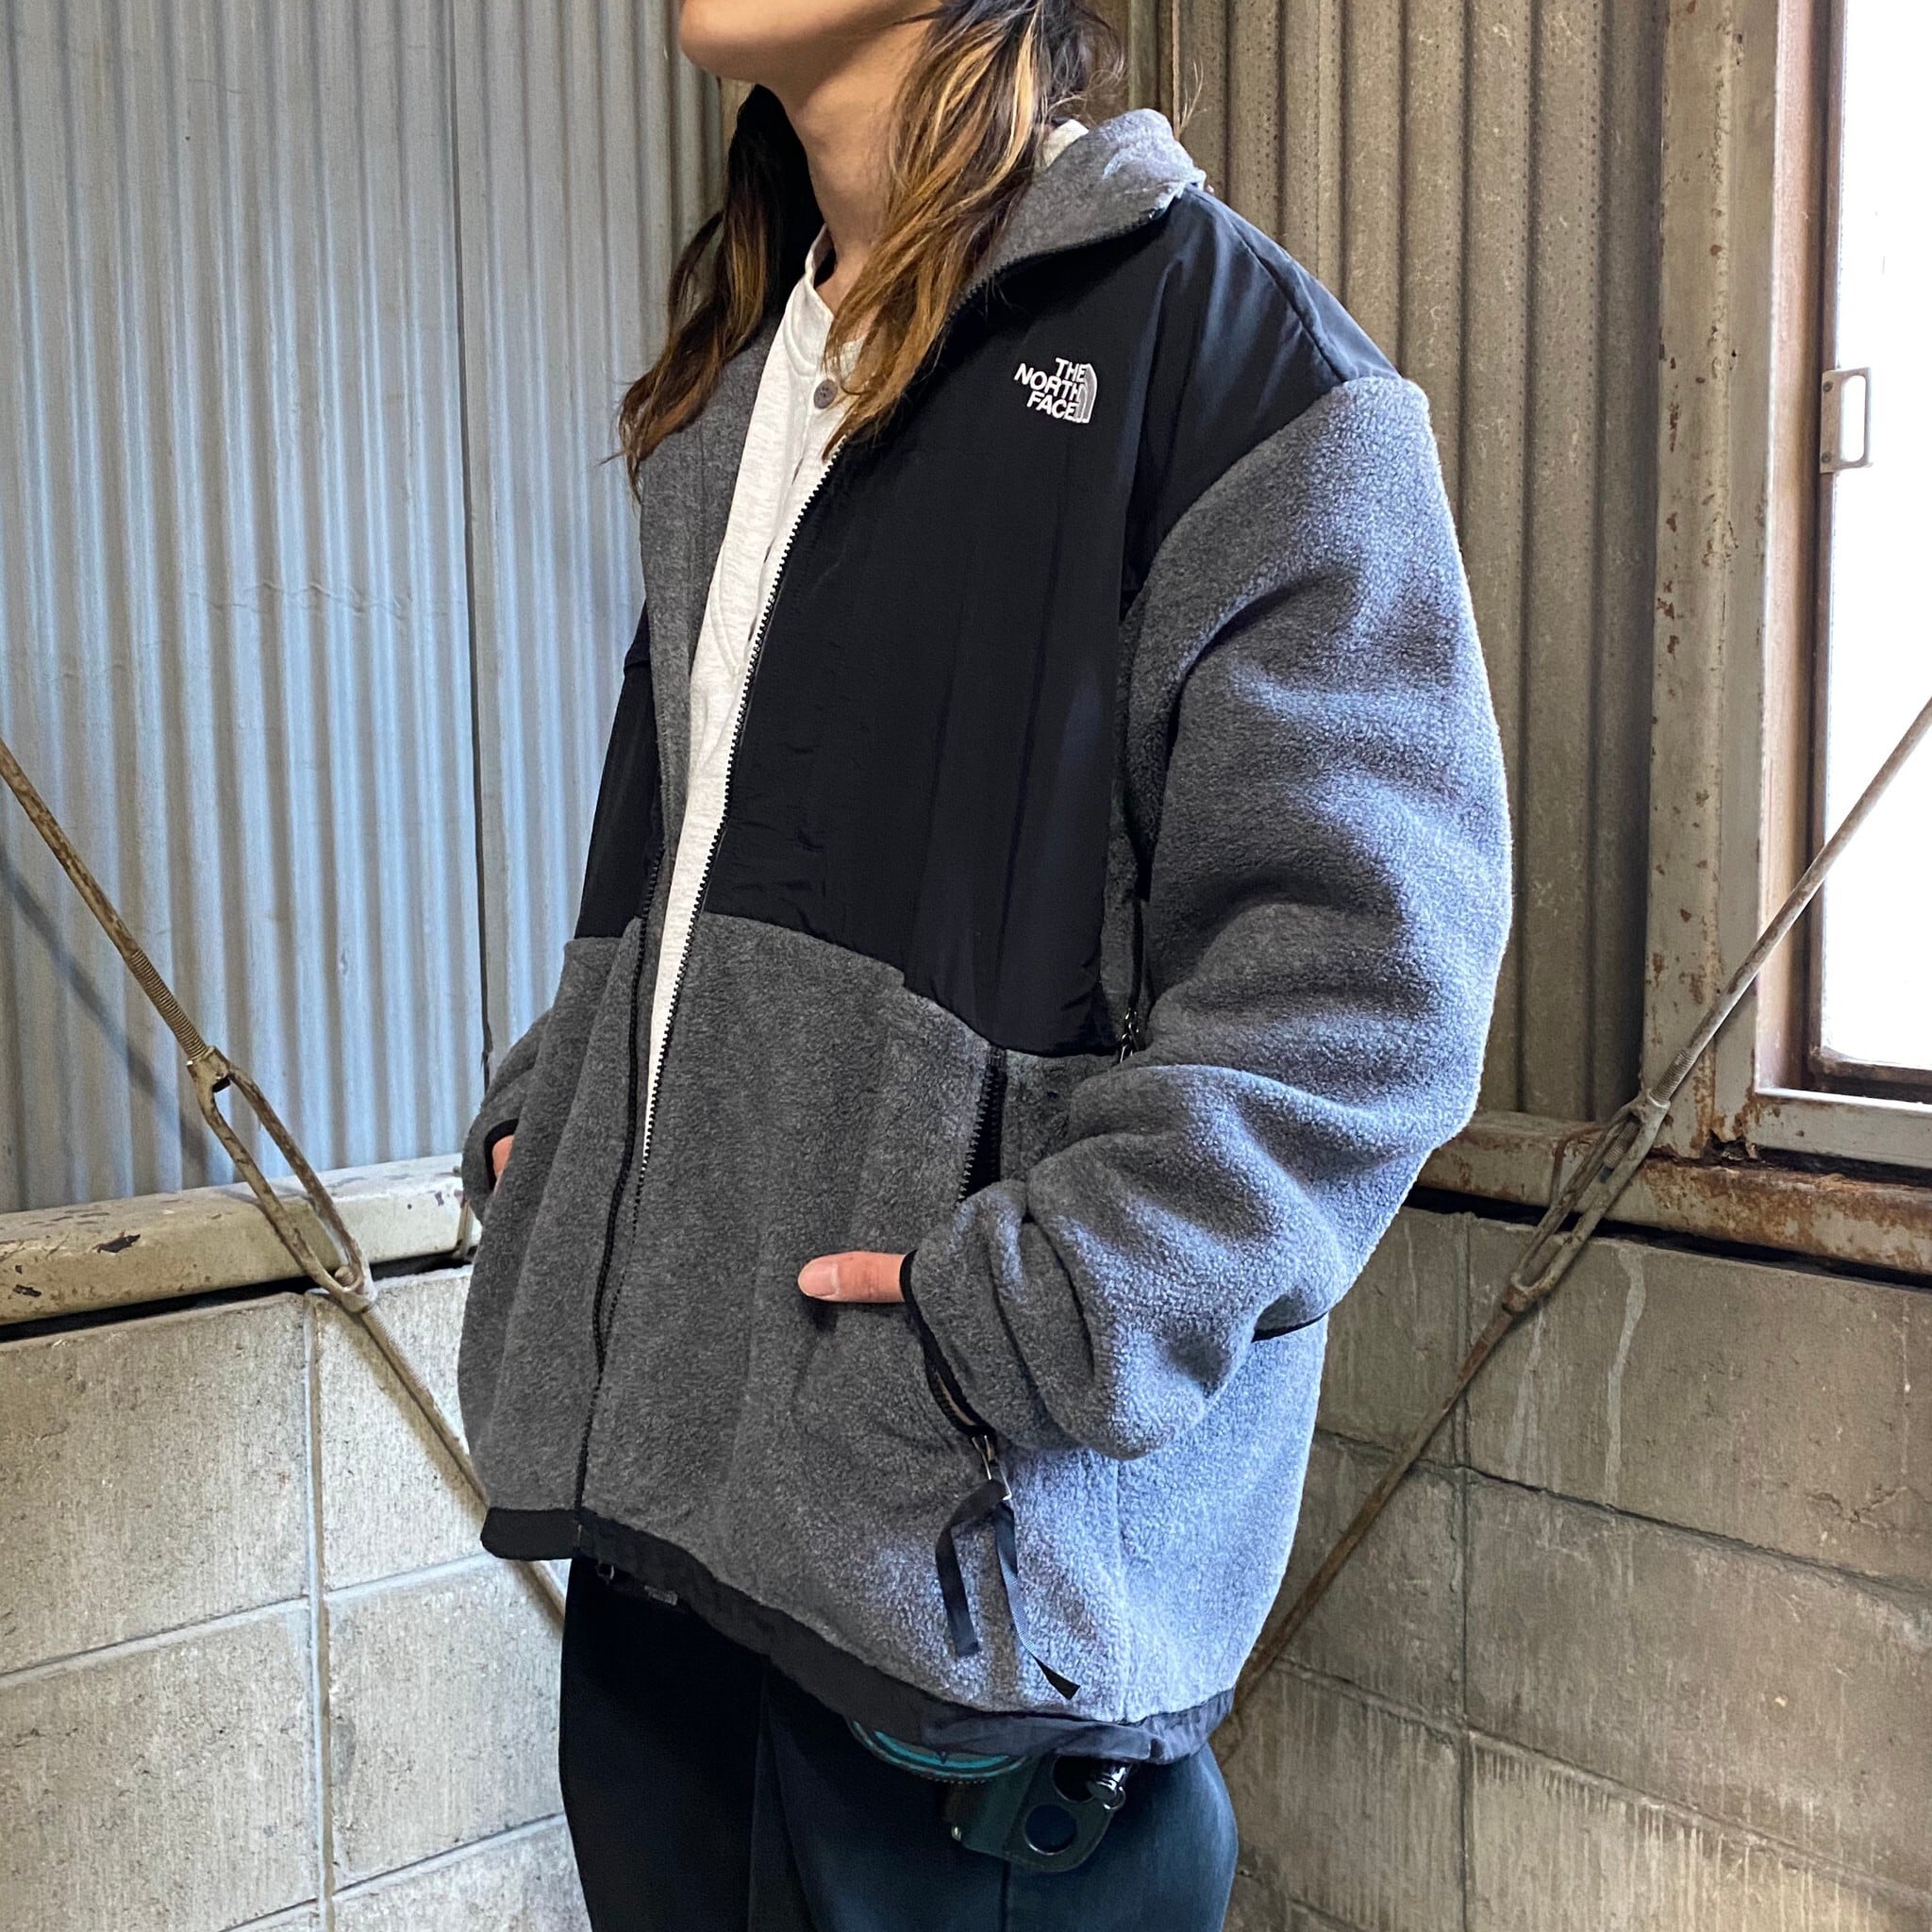 THE NORTH FACE デナリジャケット ダークグレー